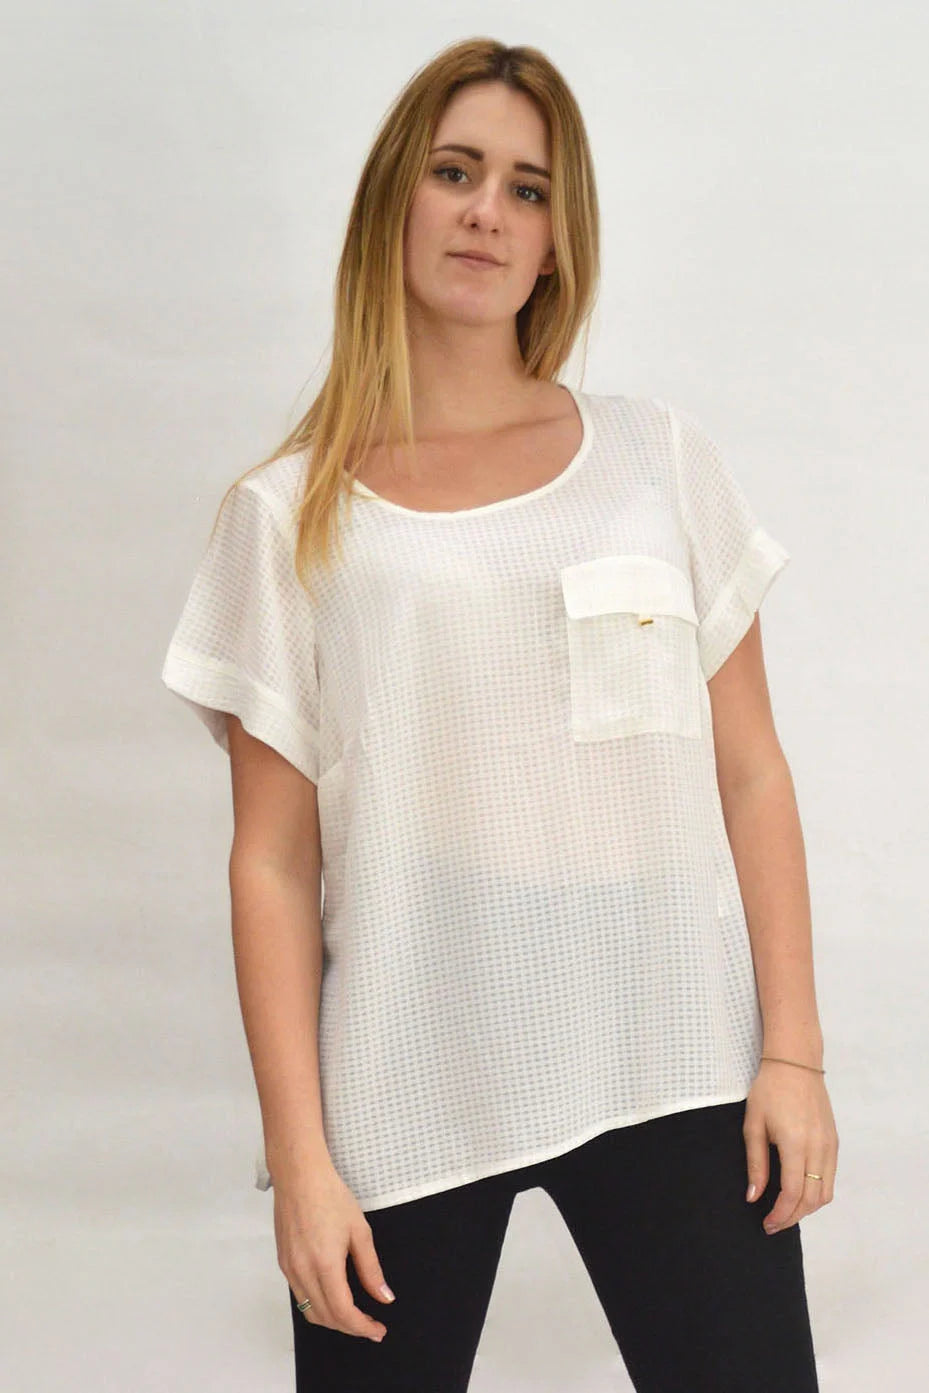 Threads Silky Scoop Neck Top Self Check Fabric